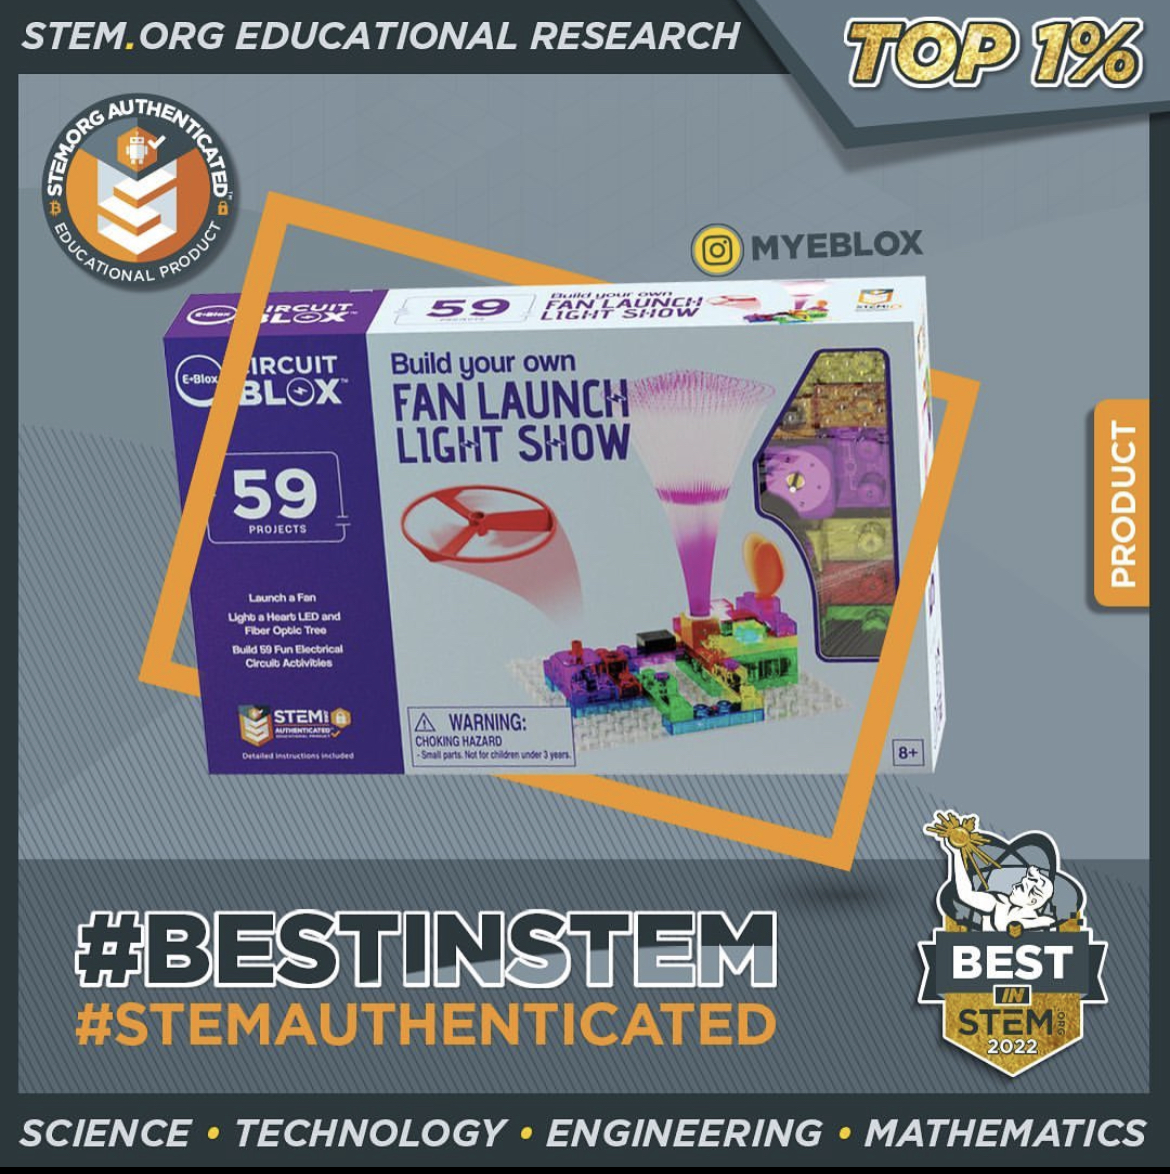 ⚡️E-Blox⚡️ is proud to support #STEM education and be @Stemdotorg authenticated!
⭐️ Buy now: loom.ly/1FTEq9o
.
#EBlox #StemDotOrg #STEMAuthenticated #STEMtoys #STEMeducation #stemlearning #STEAM #legocompatible #legomania #Lego #stemforkids